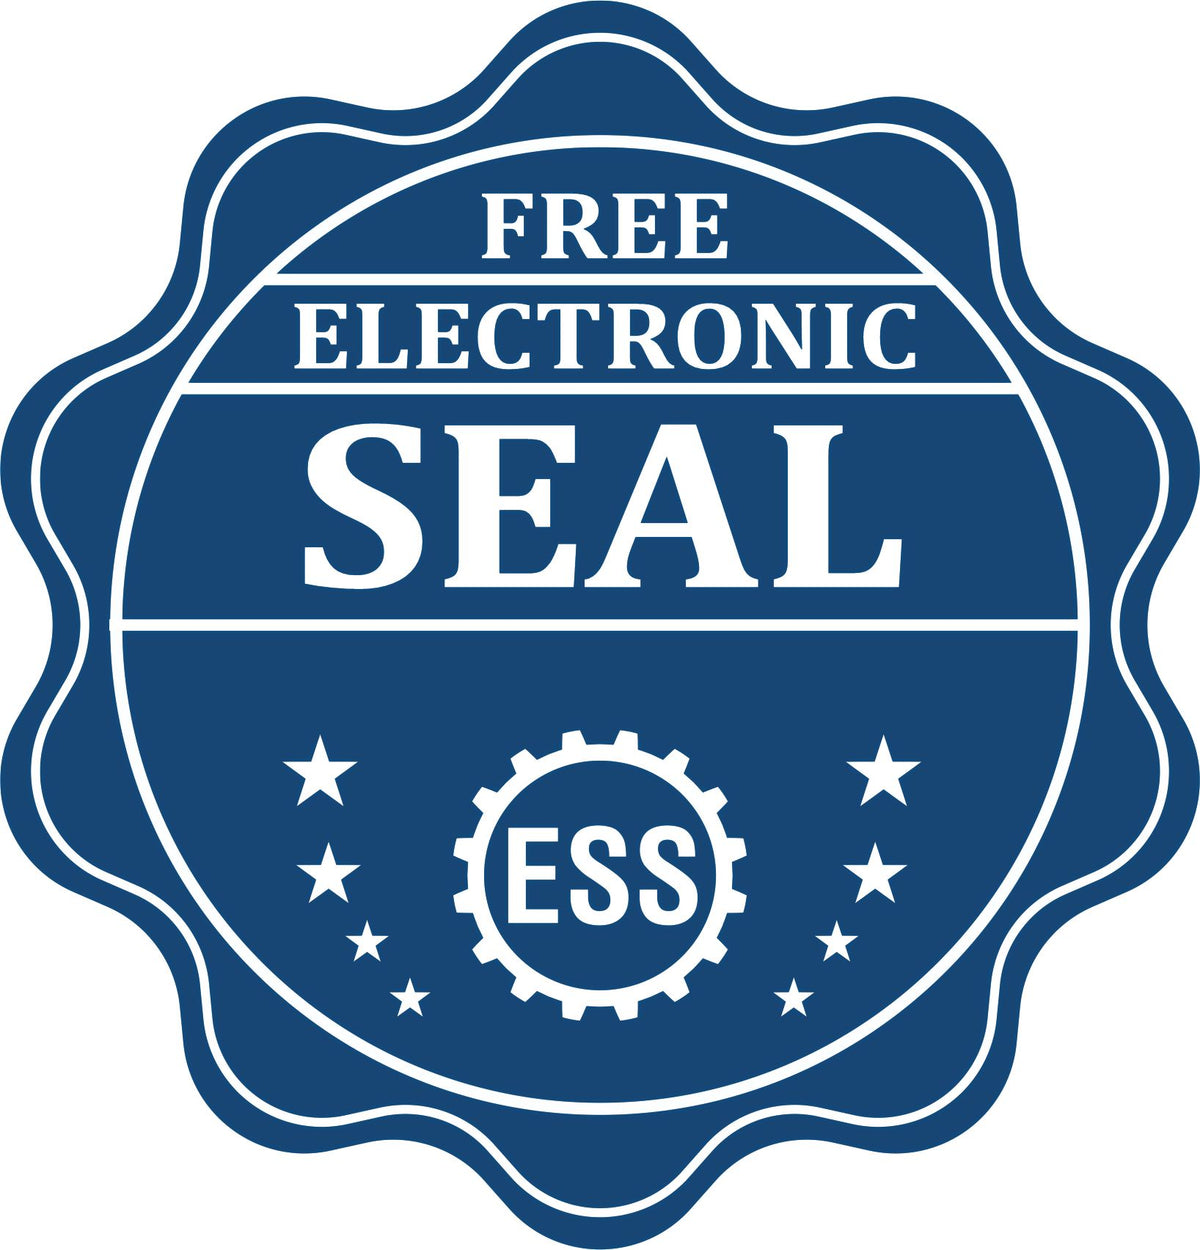 A badge showing a free electronic seal for the Hybrid Michigan Architect Seal with stars and the ESS gear on the emblem.